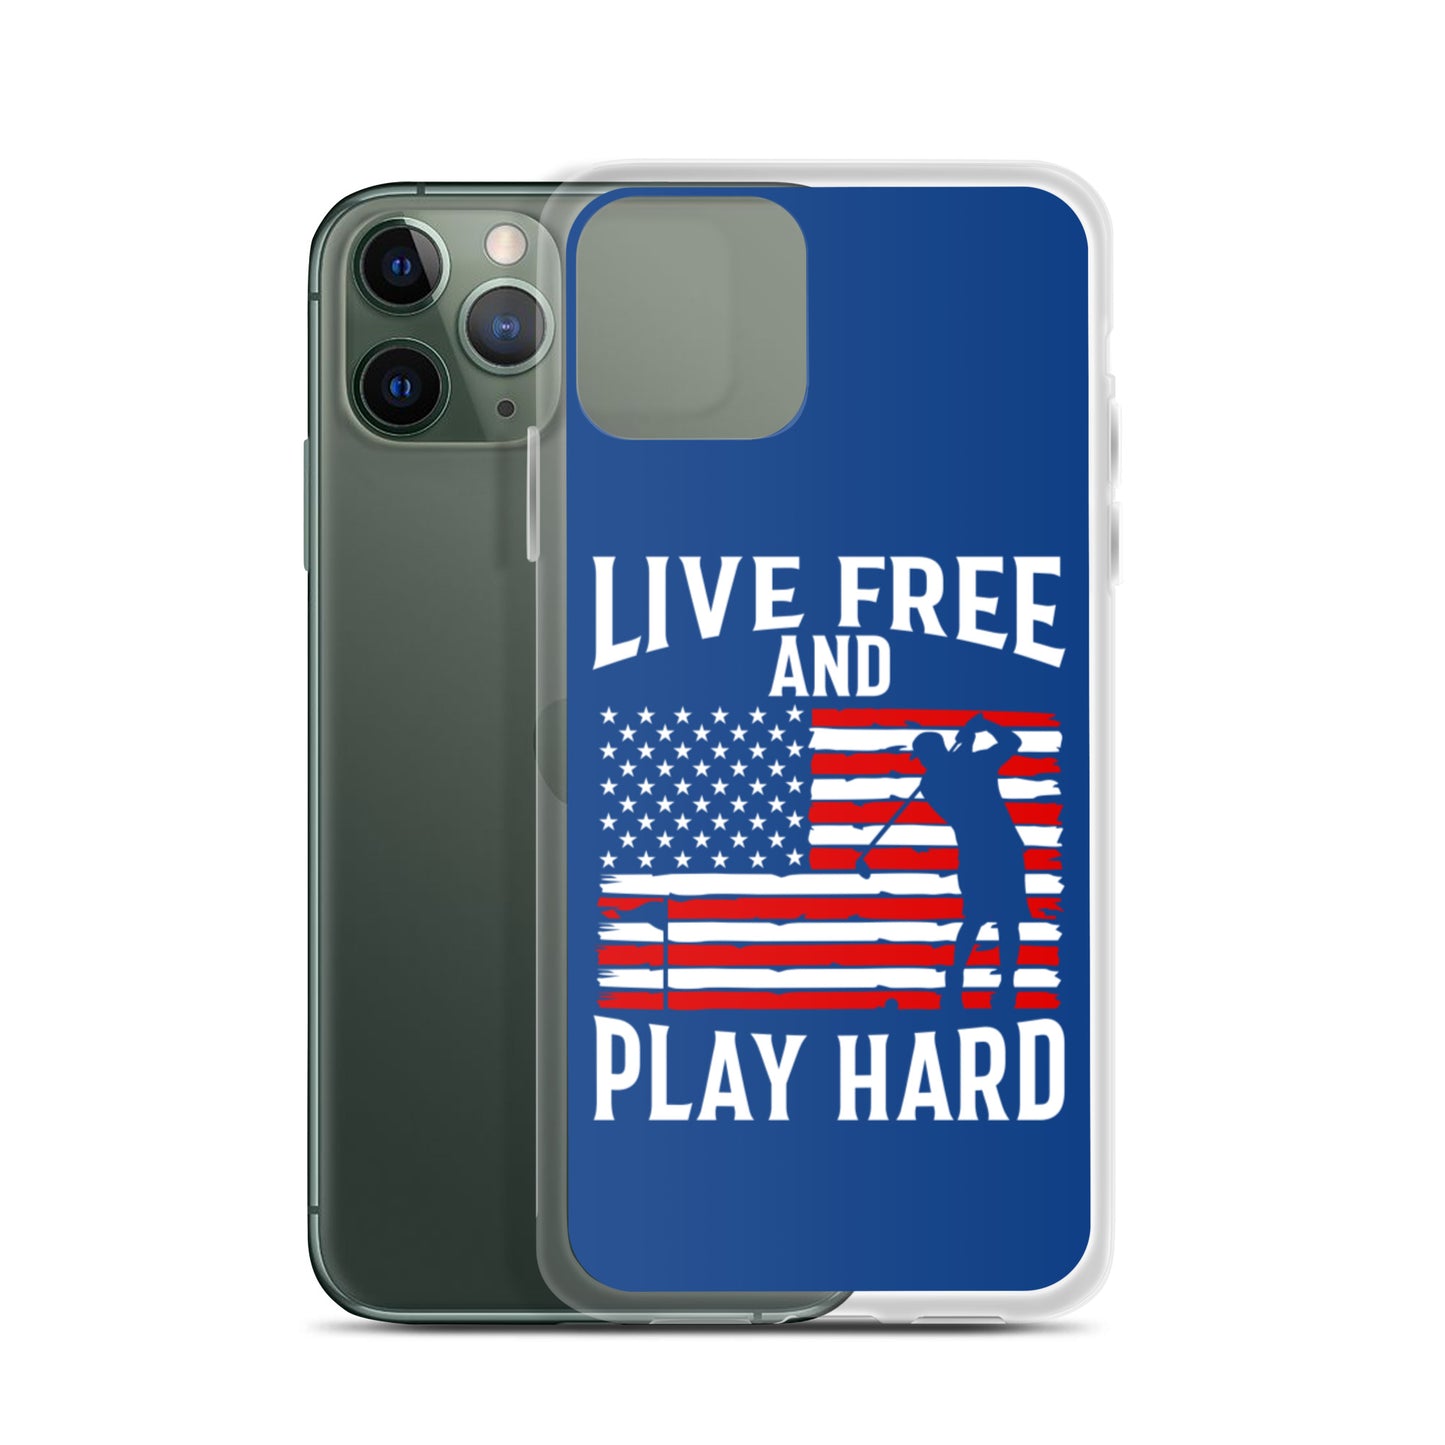 Live Free & Play Hard iPhone Case